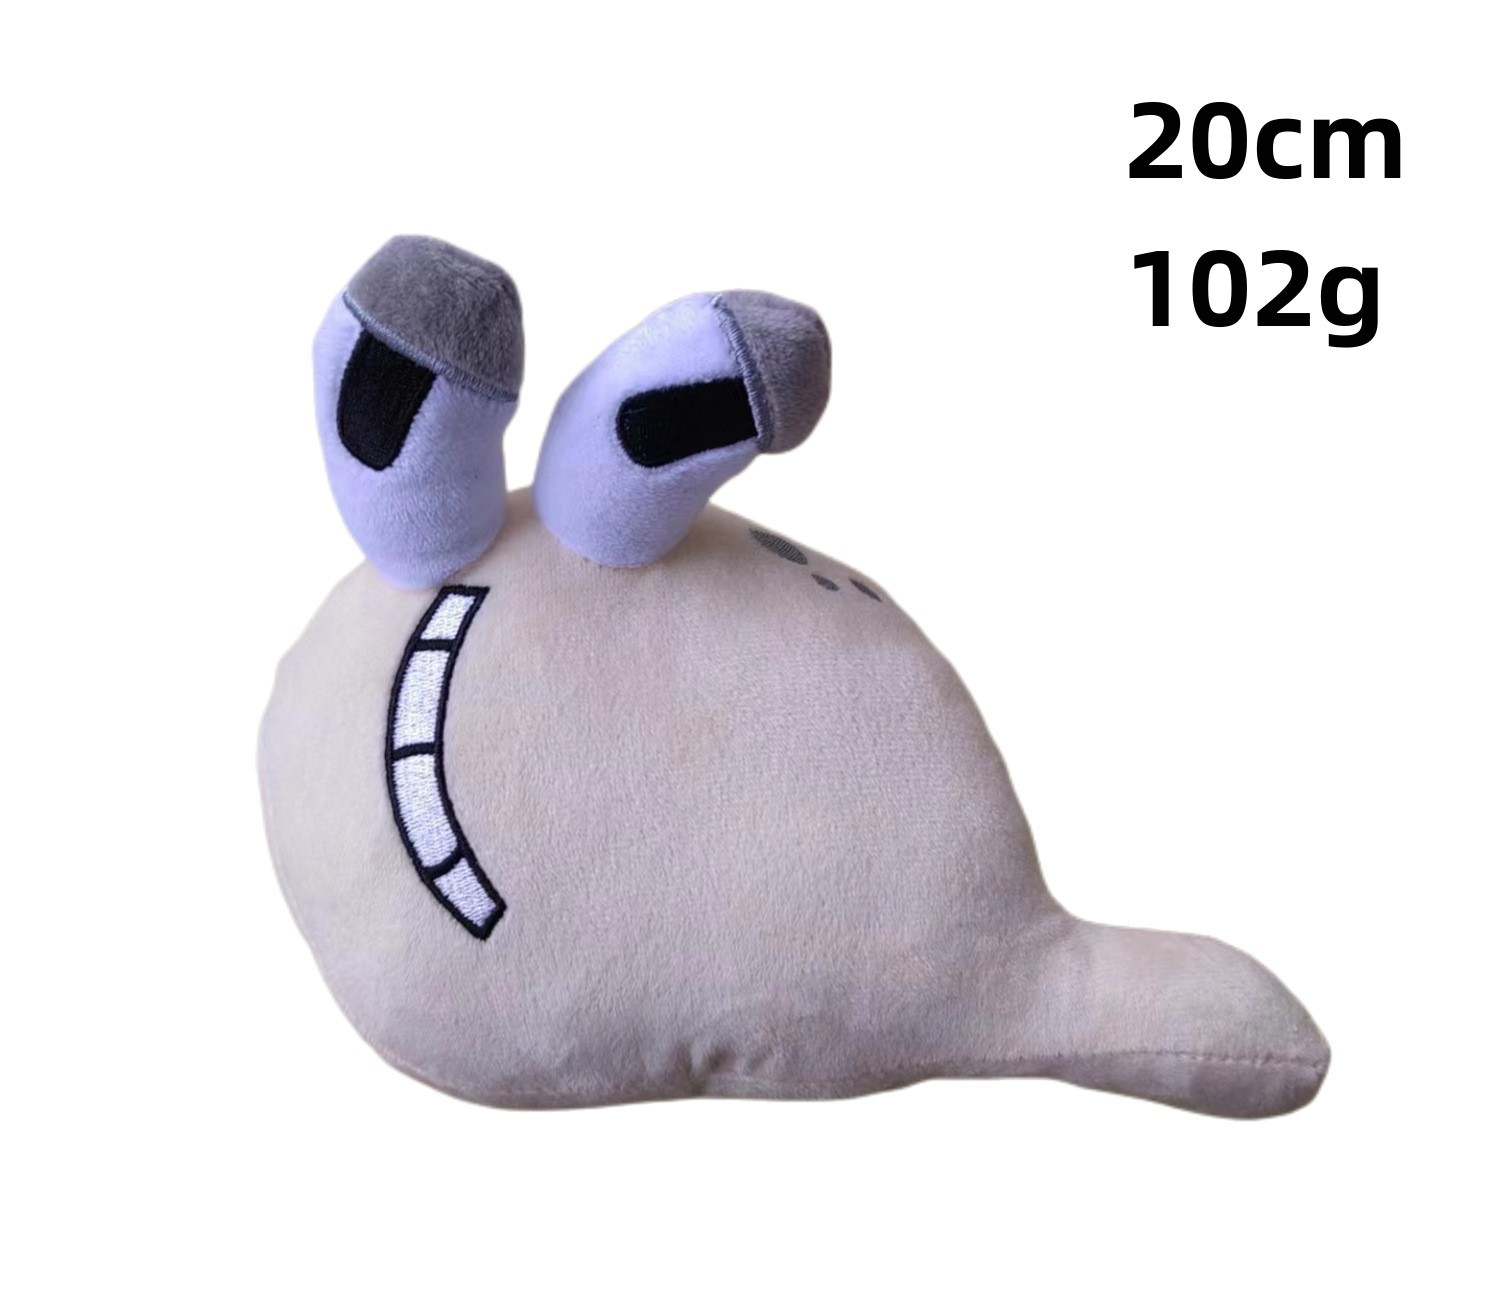 20cm Alphabet Lore Letter Legends Alphabet Lore Plush Toys Wholesale From  Manufacturers For Childrens Education And Learning From Flowery888, $2.16